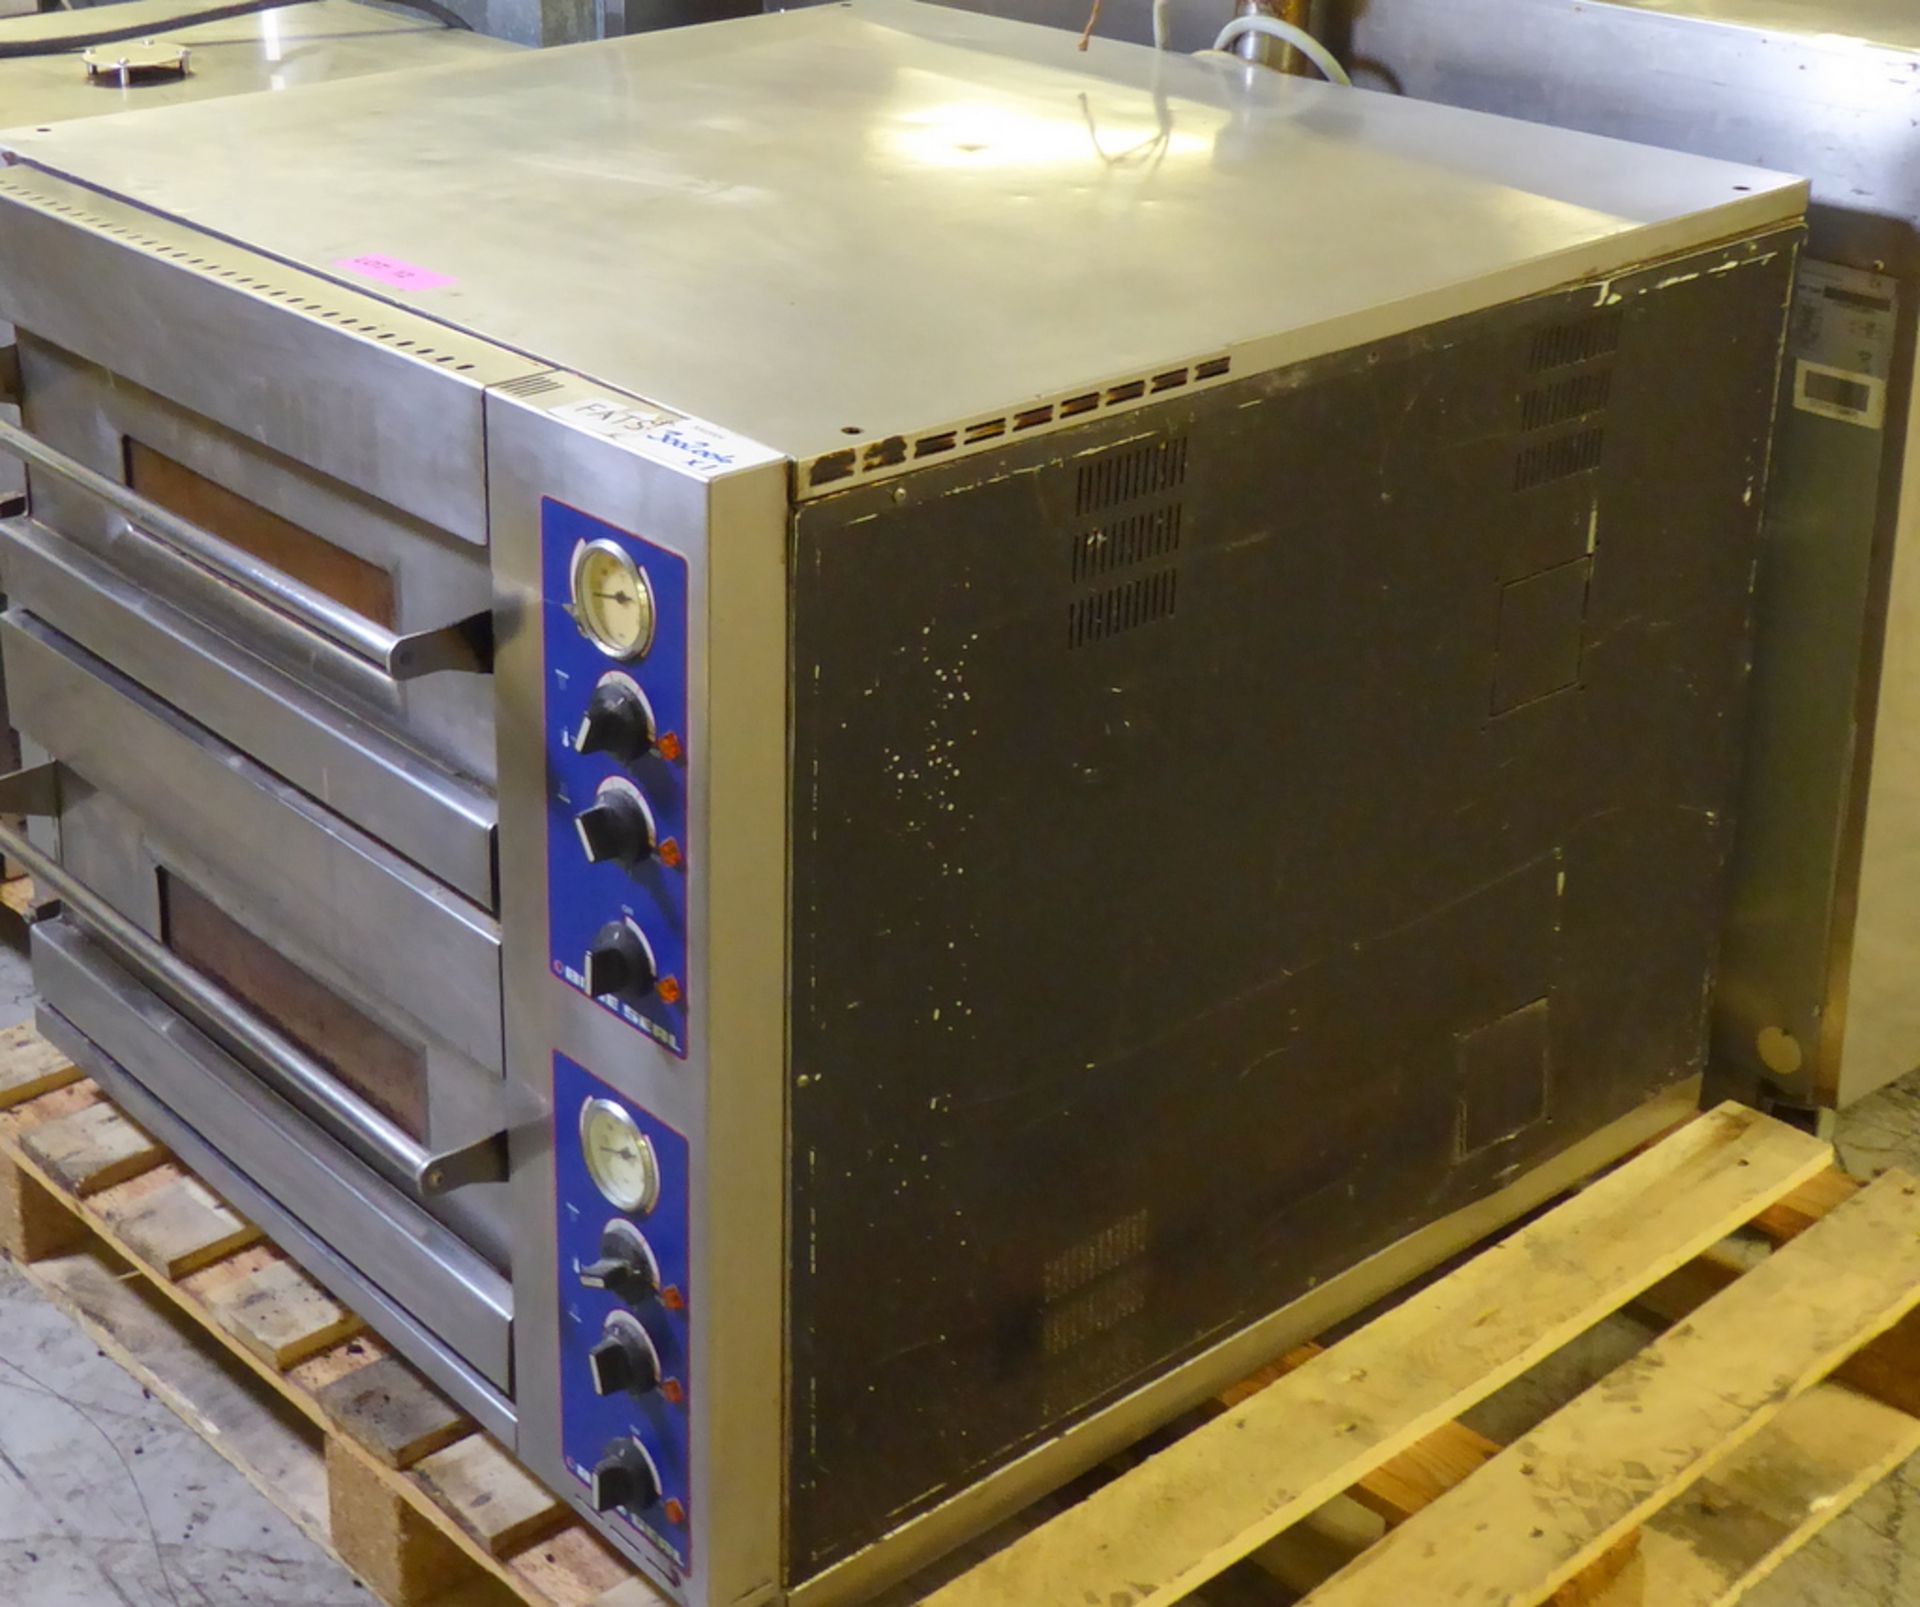 Blue Seal DB8-30 Double Pizza Oven, 8.8kw 230v Mains Wired 95 x 95 x 73cm (WxDxH) - Image 5 of 7